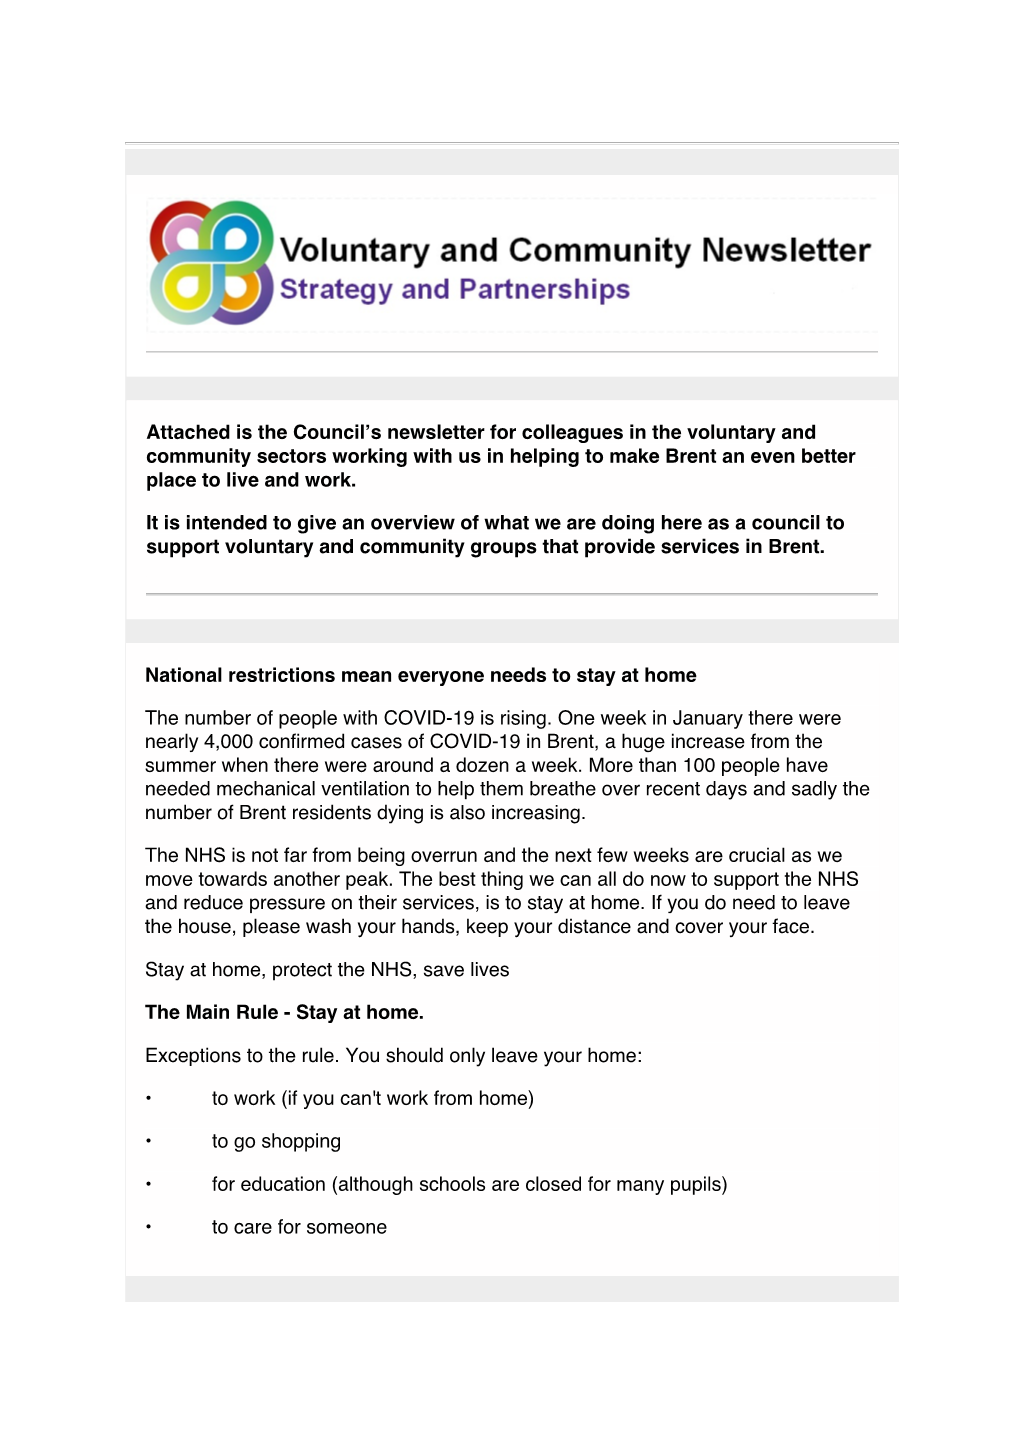 Attached Is the Council's Newsletter for Colleagues in the Voluntary And